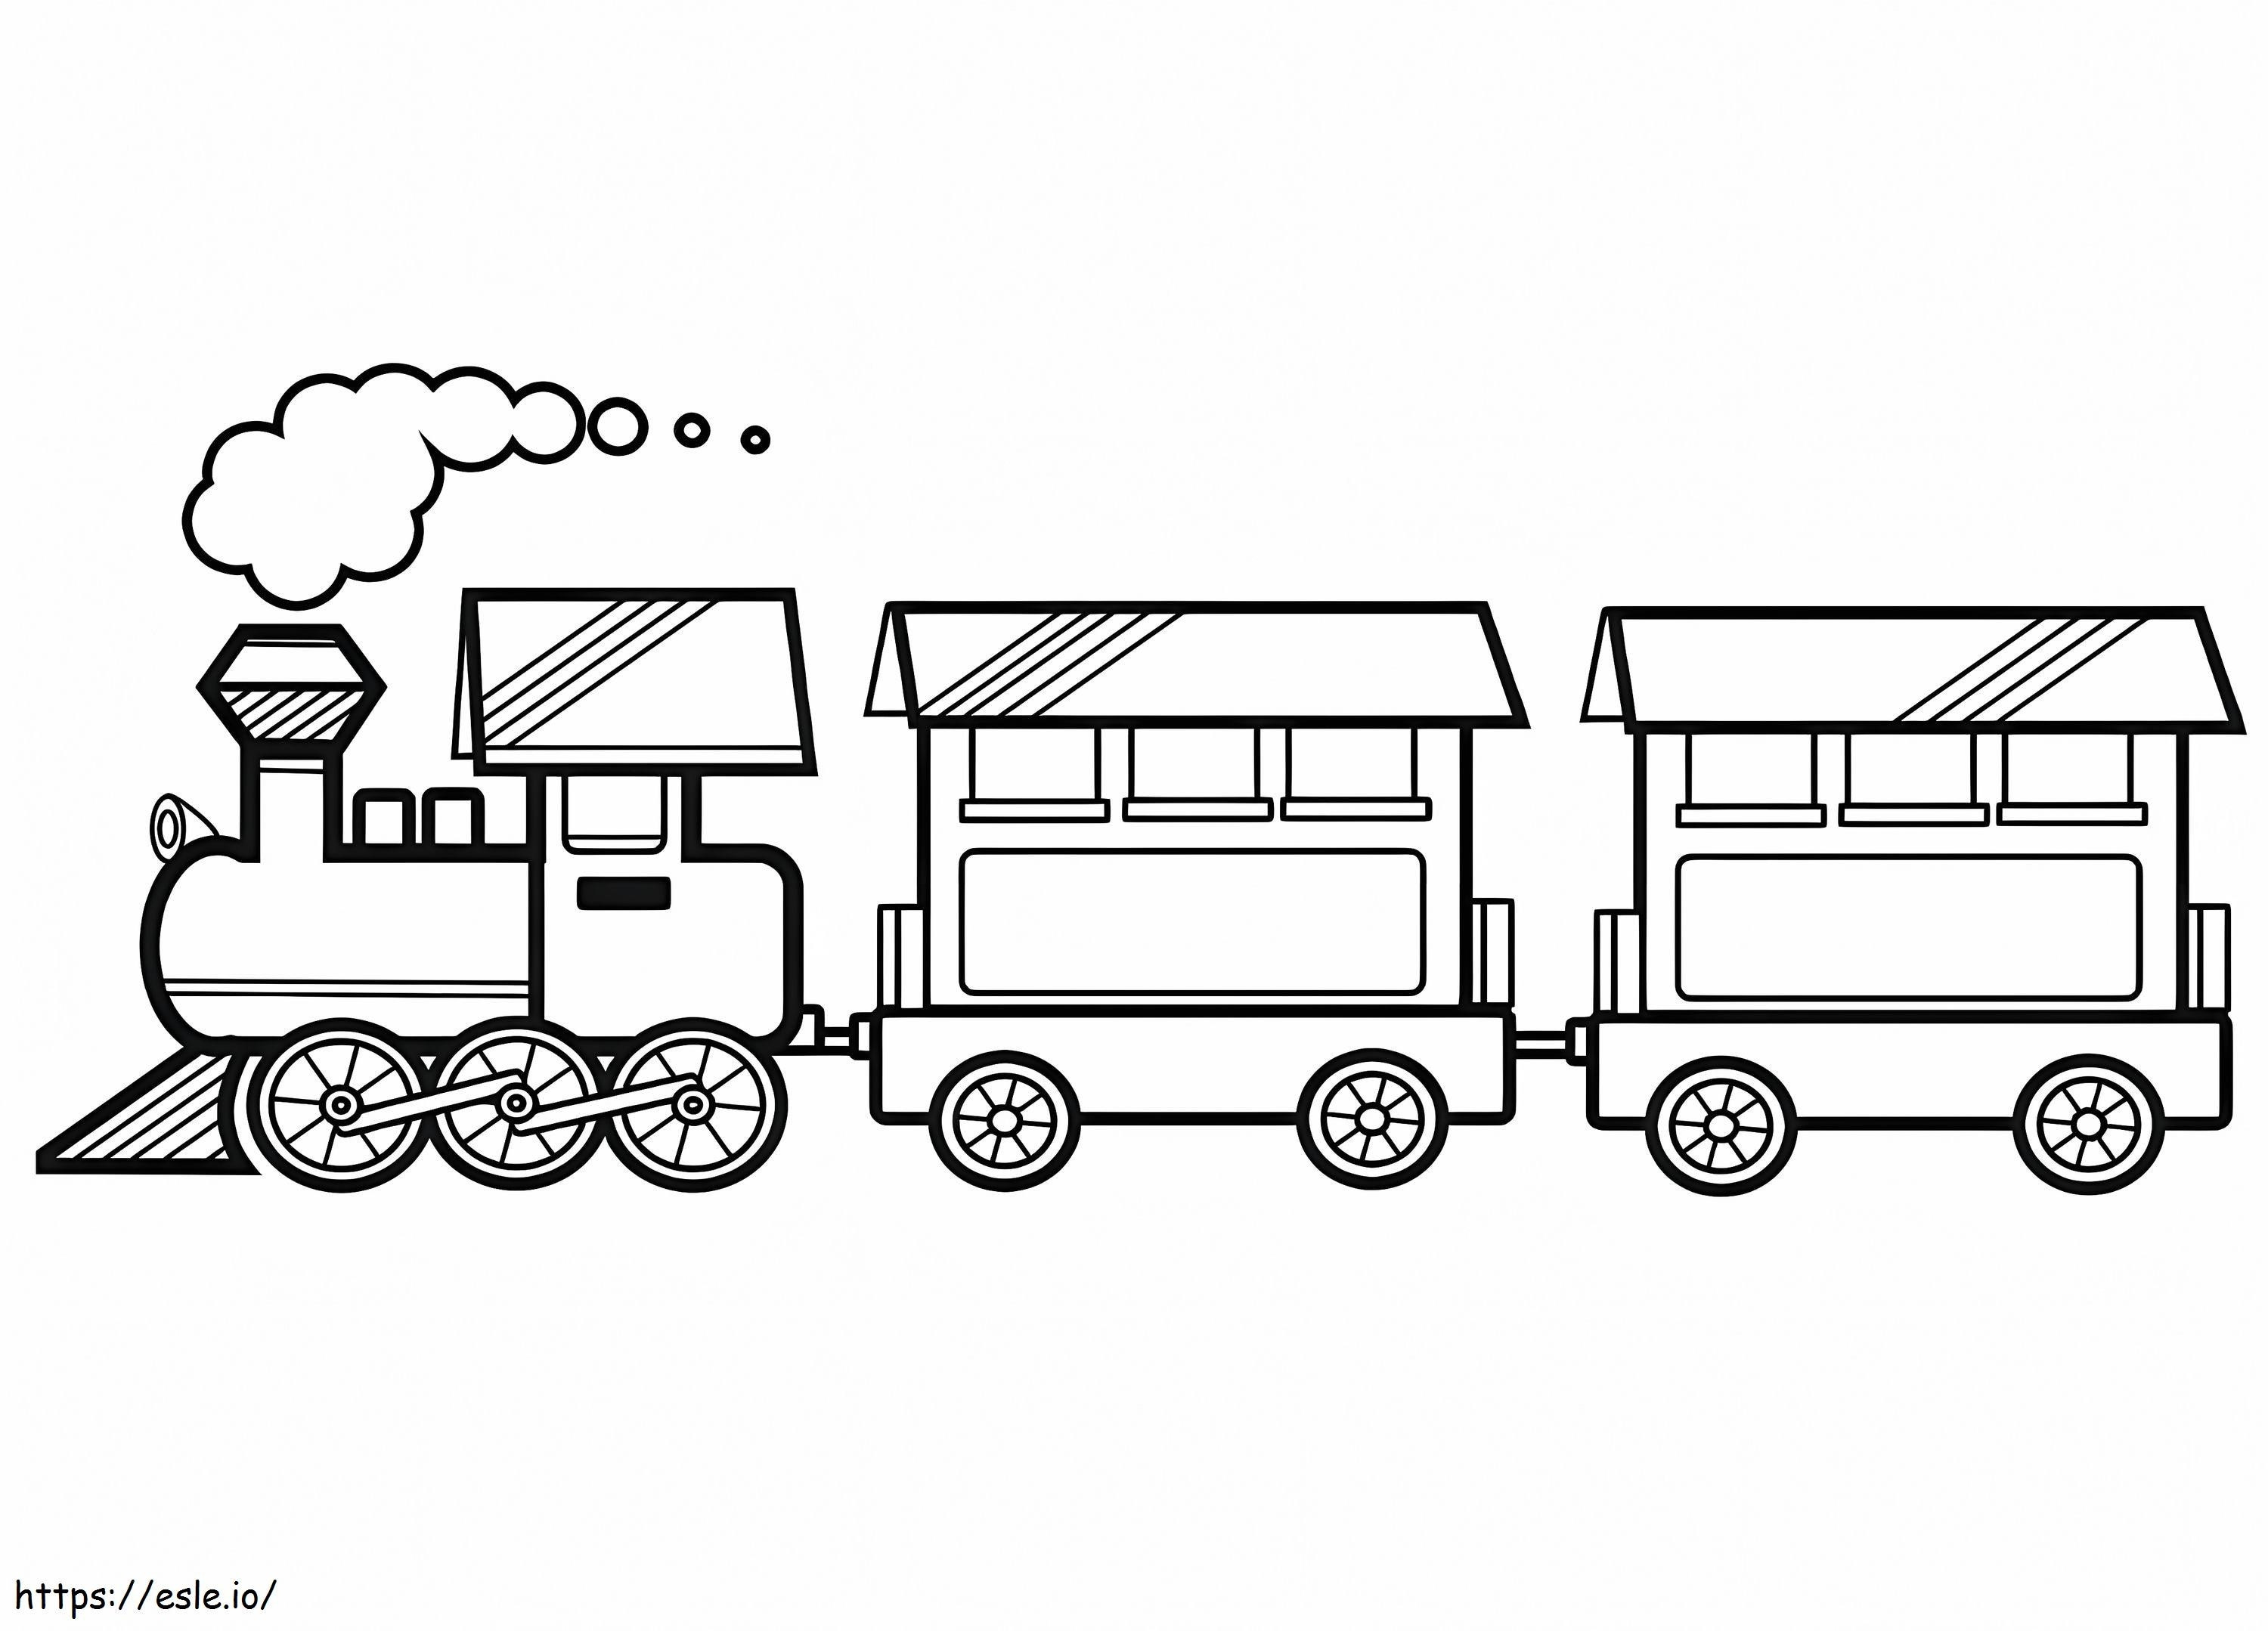 Steam Train coloring page